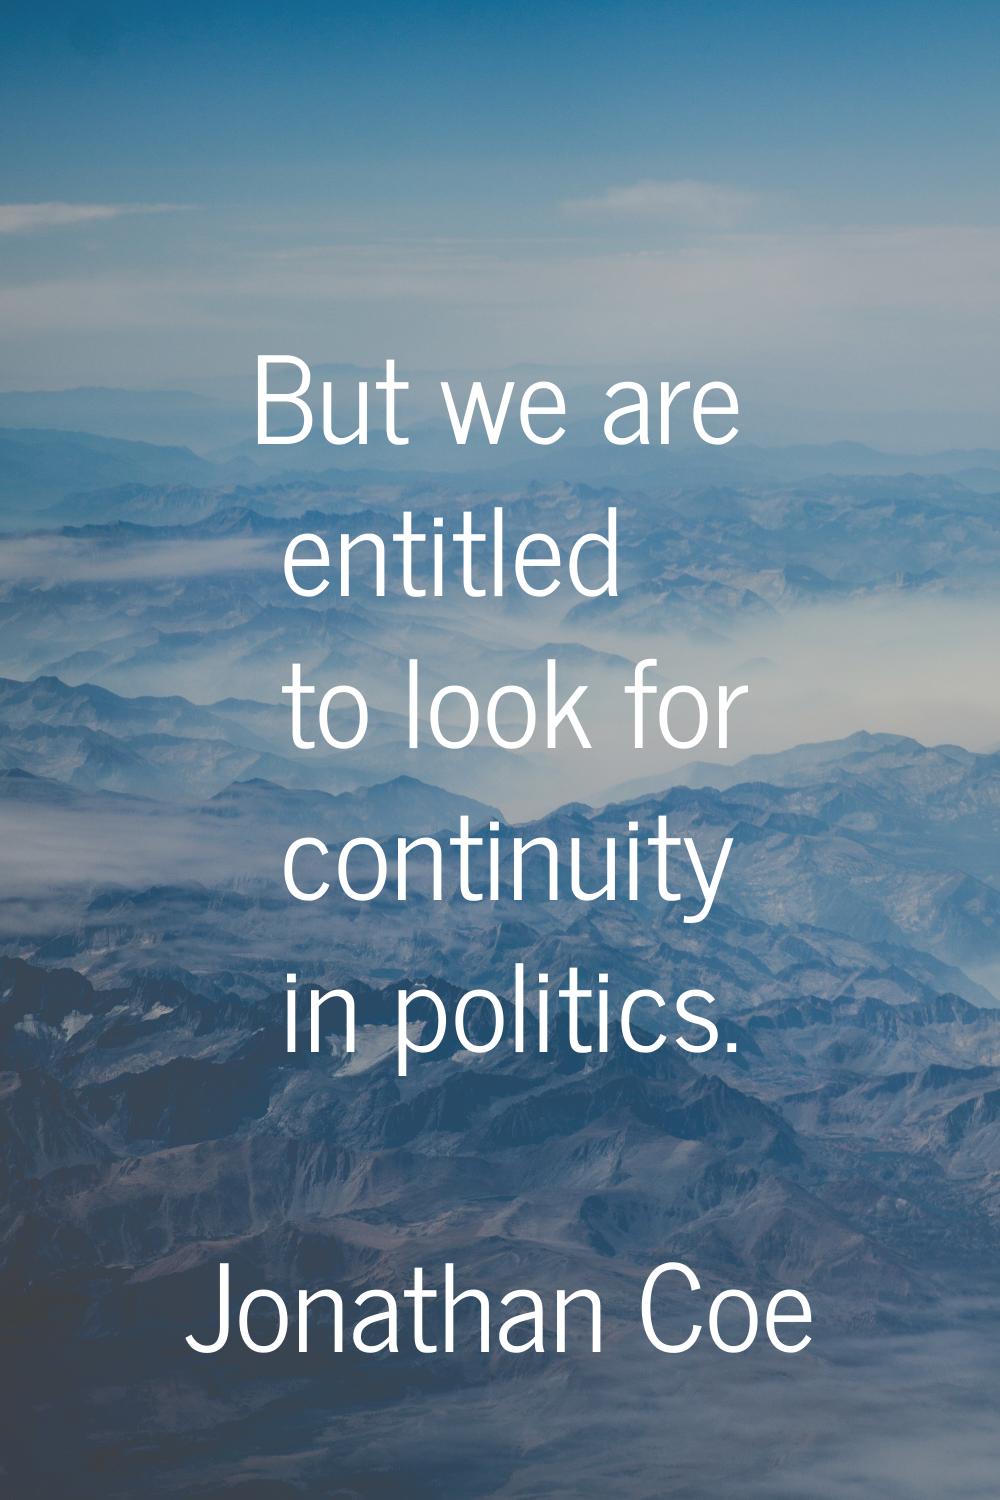 But we are entitled to look for continuity in politics.